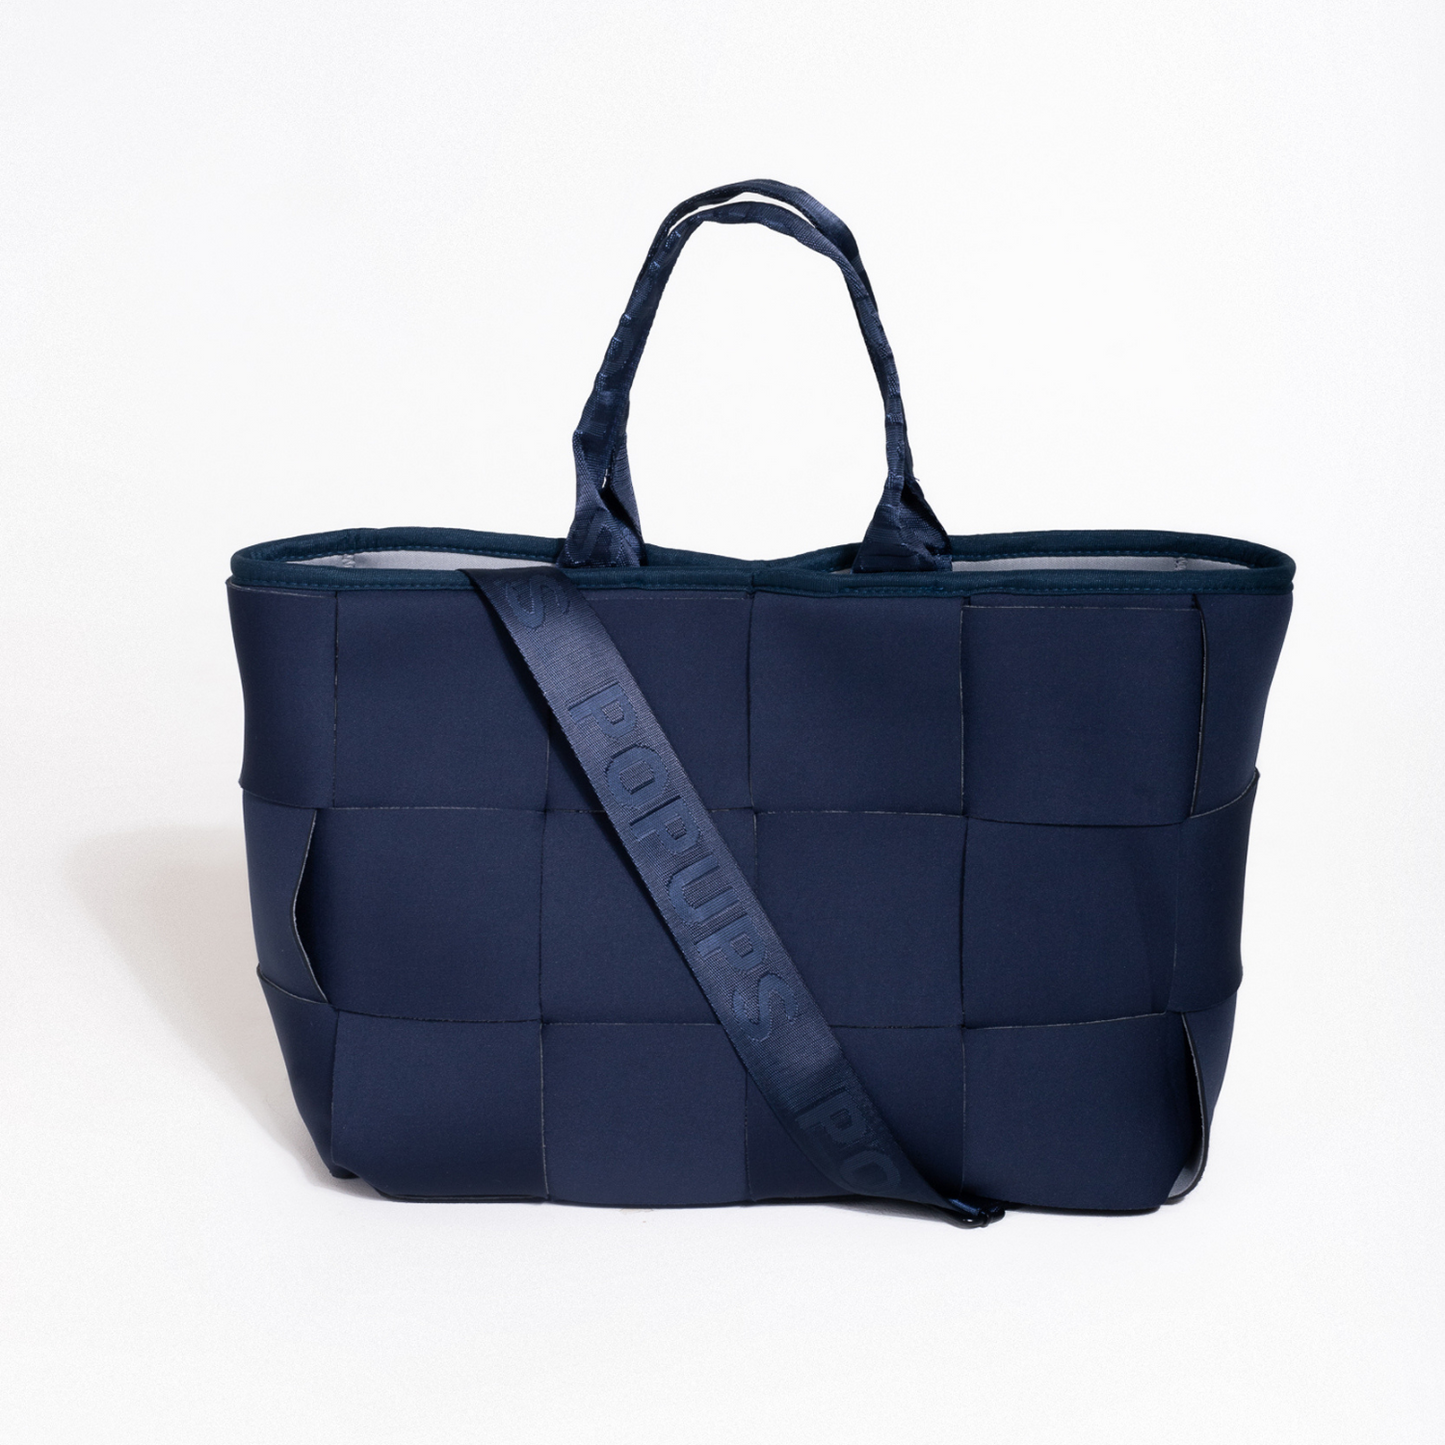 POUCH + ICON TOTE - DEEP BLUE